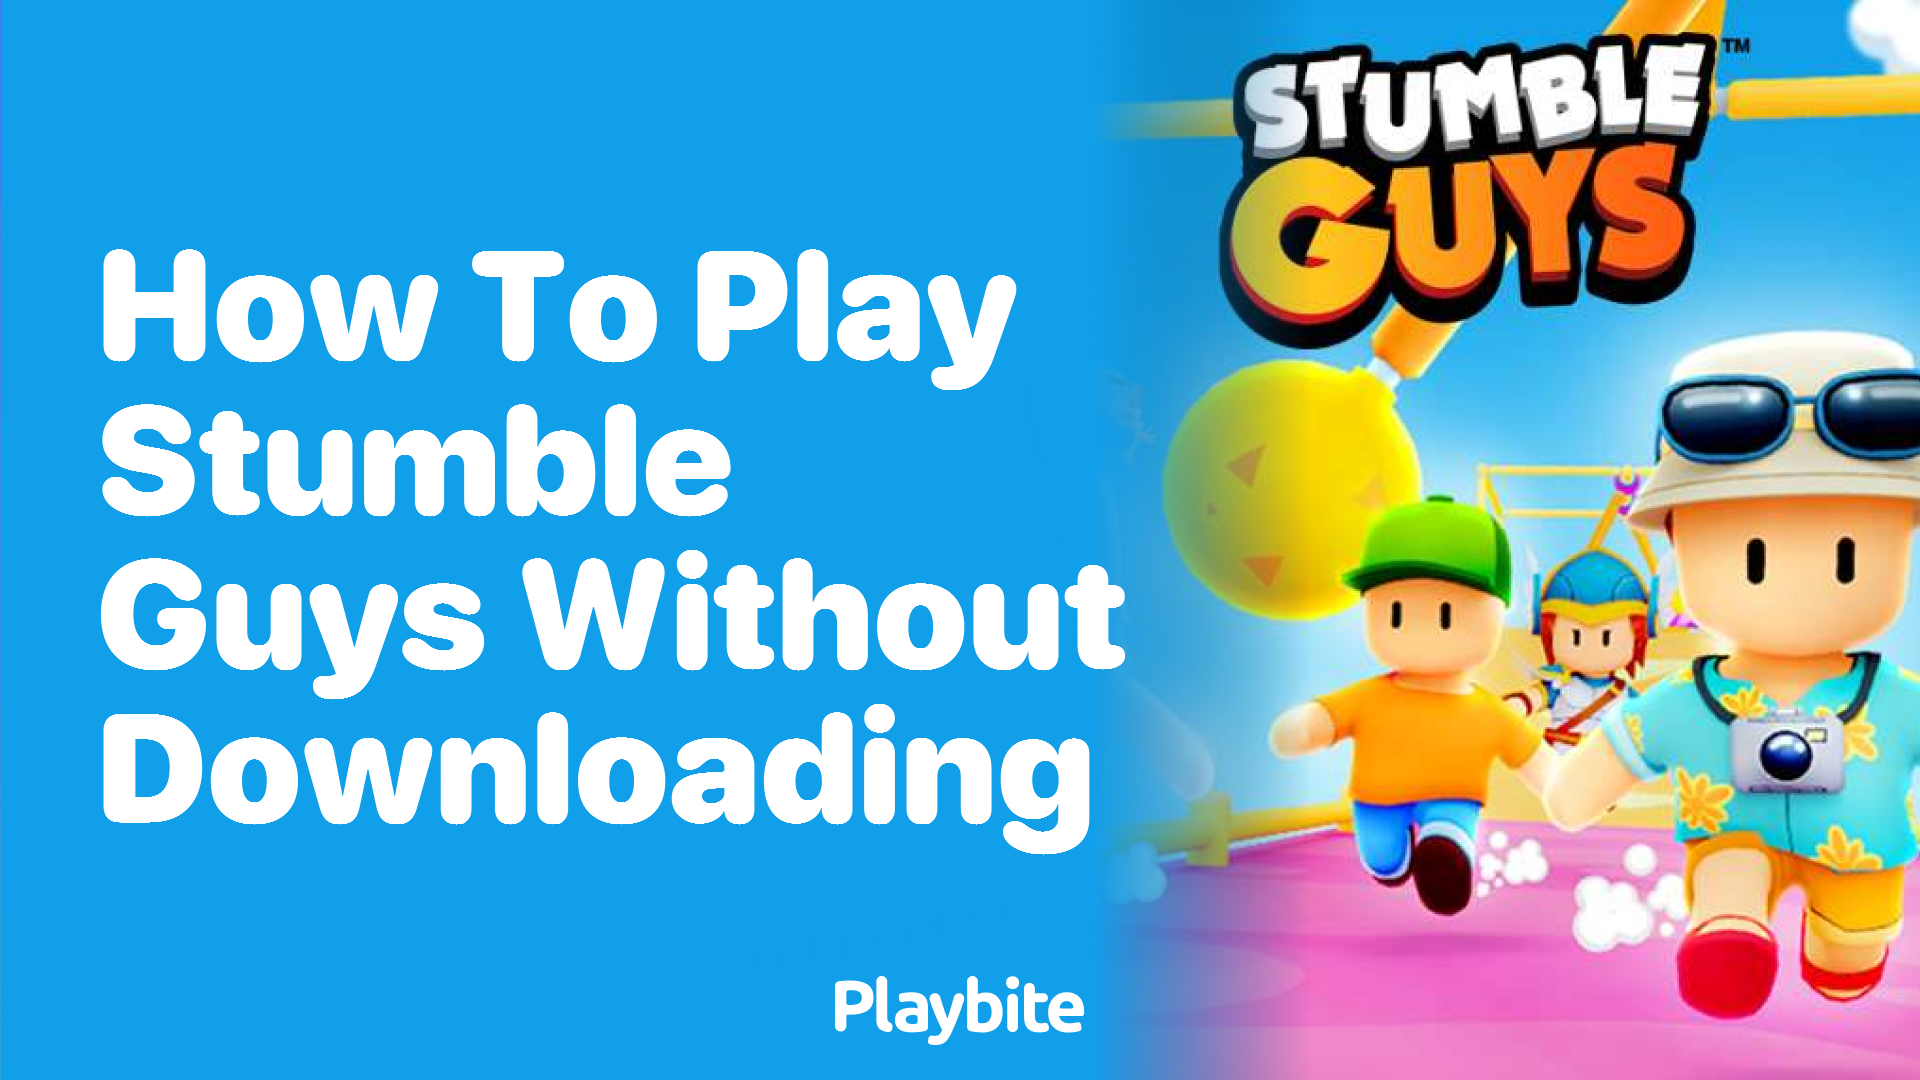 How to Play Stumble Guys Without Downloading